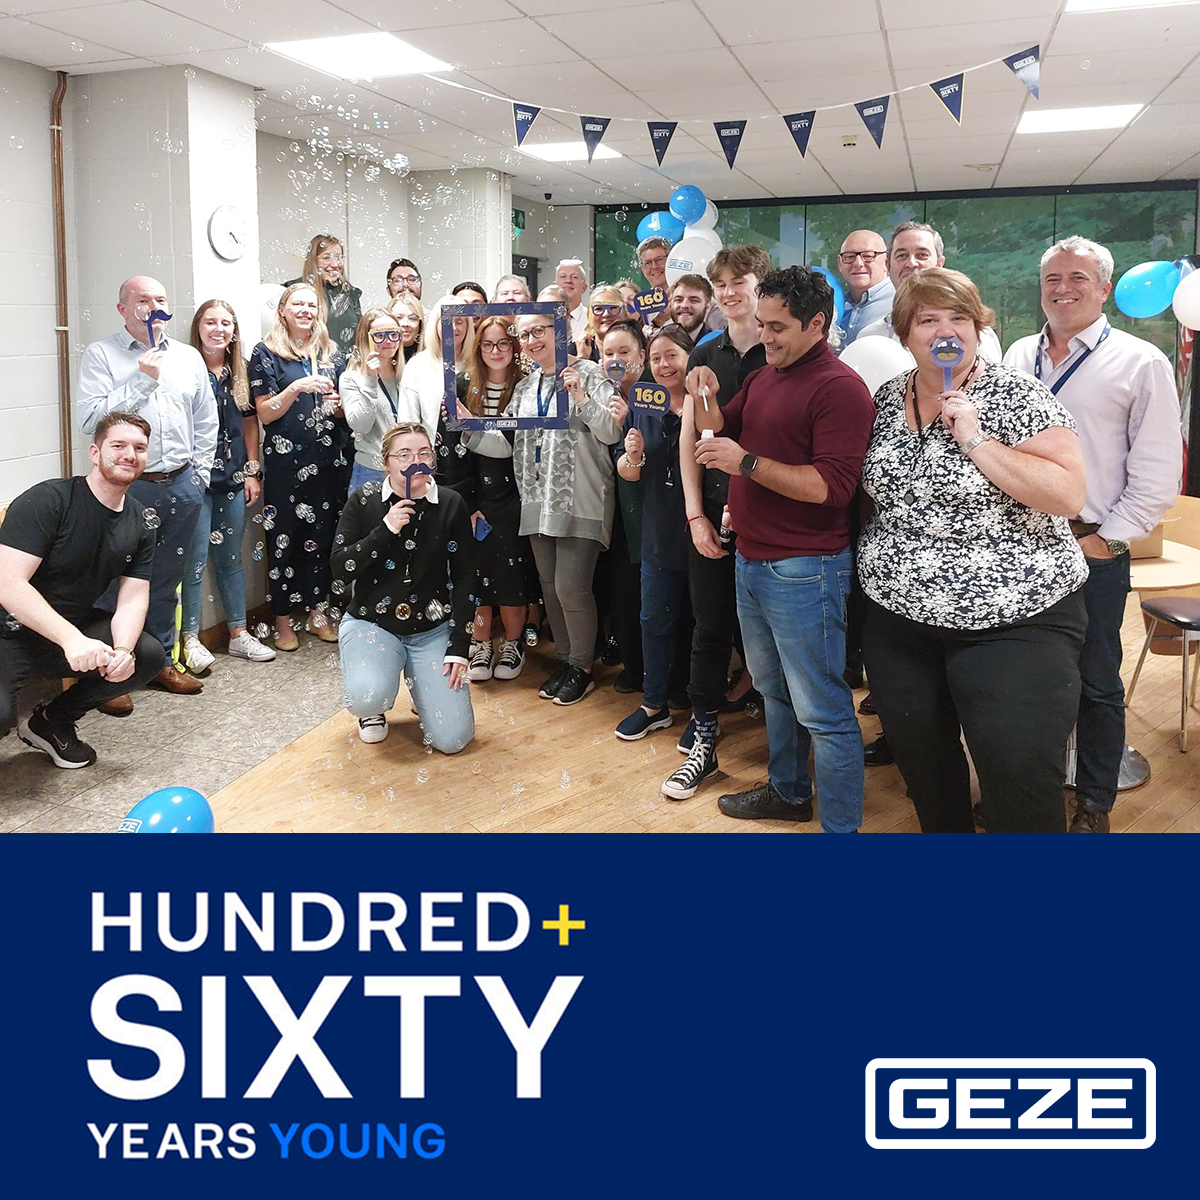 GEZE UK: Celebrating 160 Years of Innovation and Growth